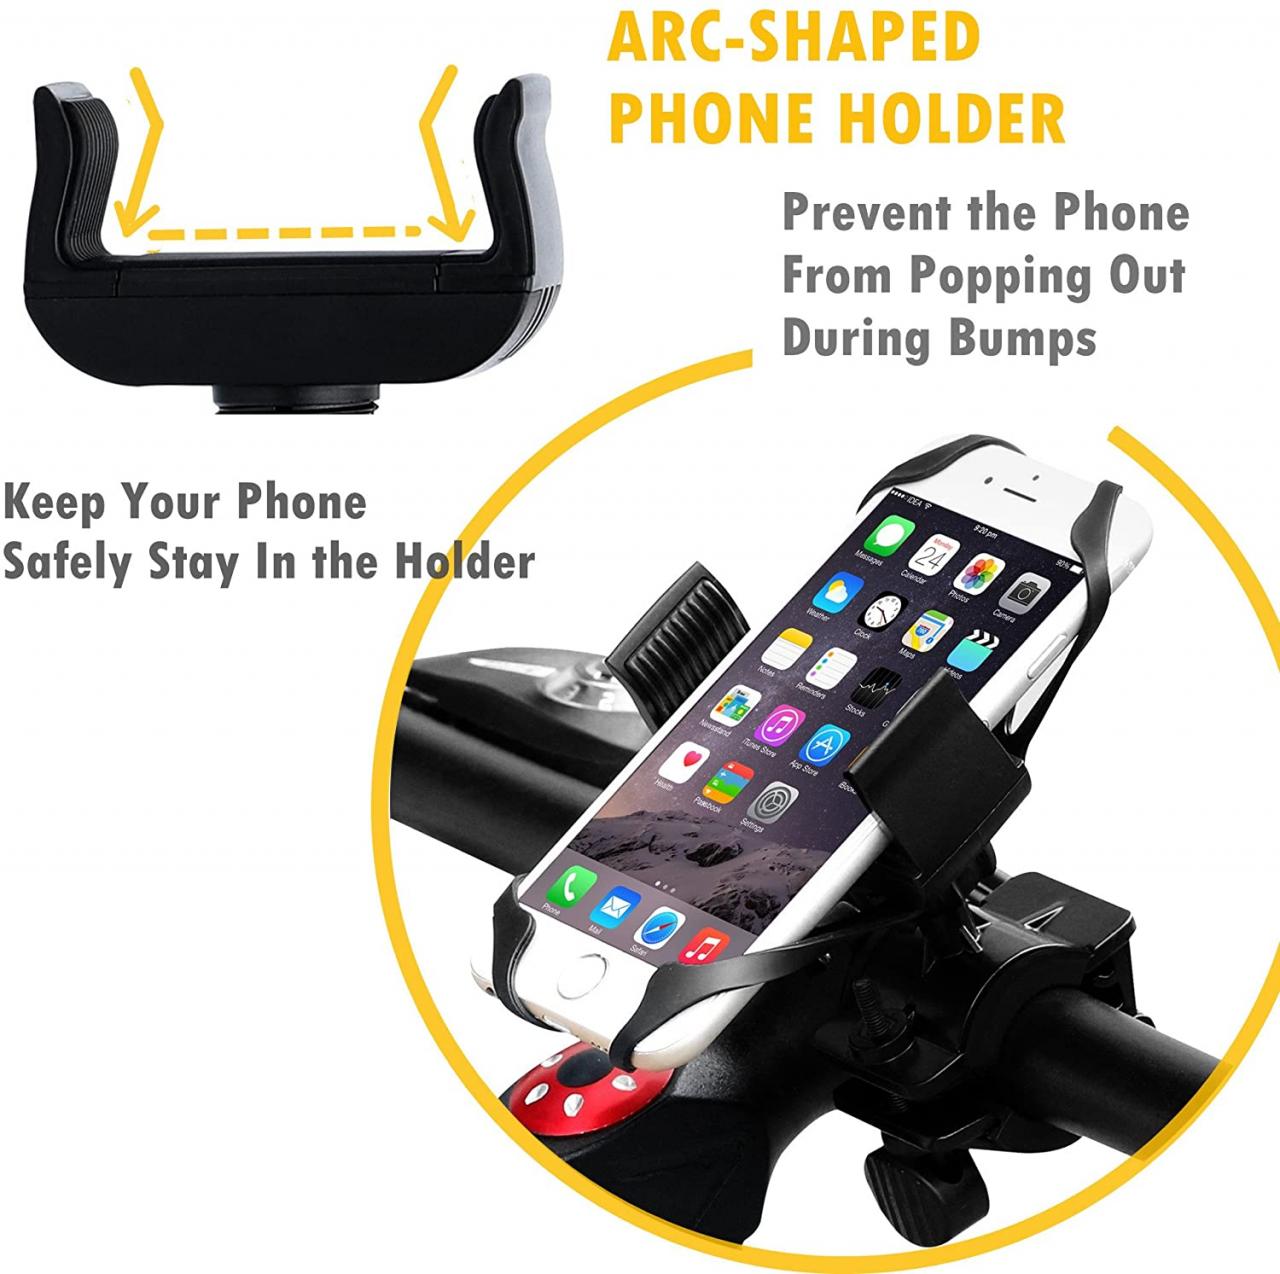 Buy Ipow Metal Bike & Motorcycle Cell Phone Mount, with Unbreakable Metal  Handlebar Holder for Bicycle, Motorbike, ATV. Fits iPhone, Samsung or Any  Smartphone/GPS Online in Taiwan. B01M98O7HH